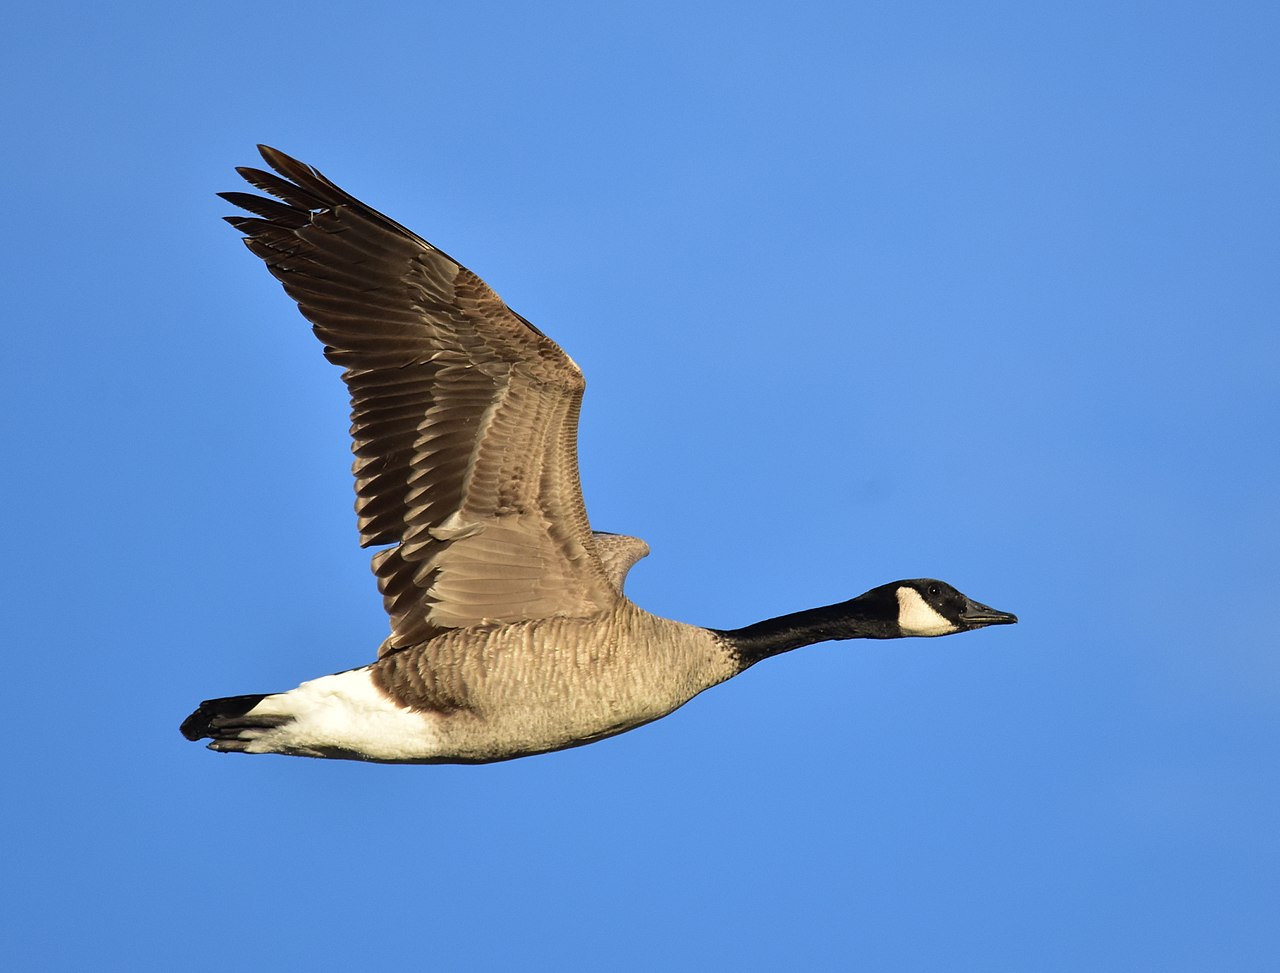 A photo of a flying Canada goose in the sky. The bird has a black head, white cheek, brown feathered body, and a white lower half with a black tip. 